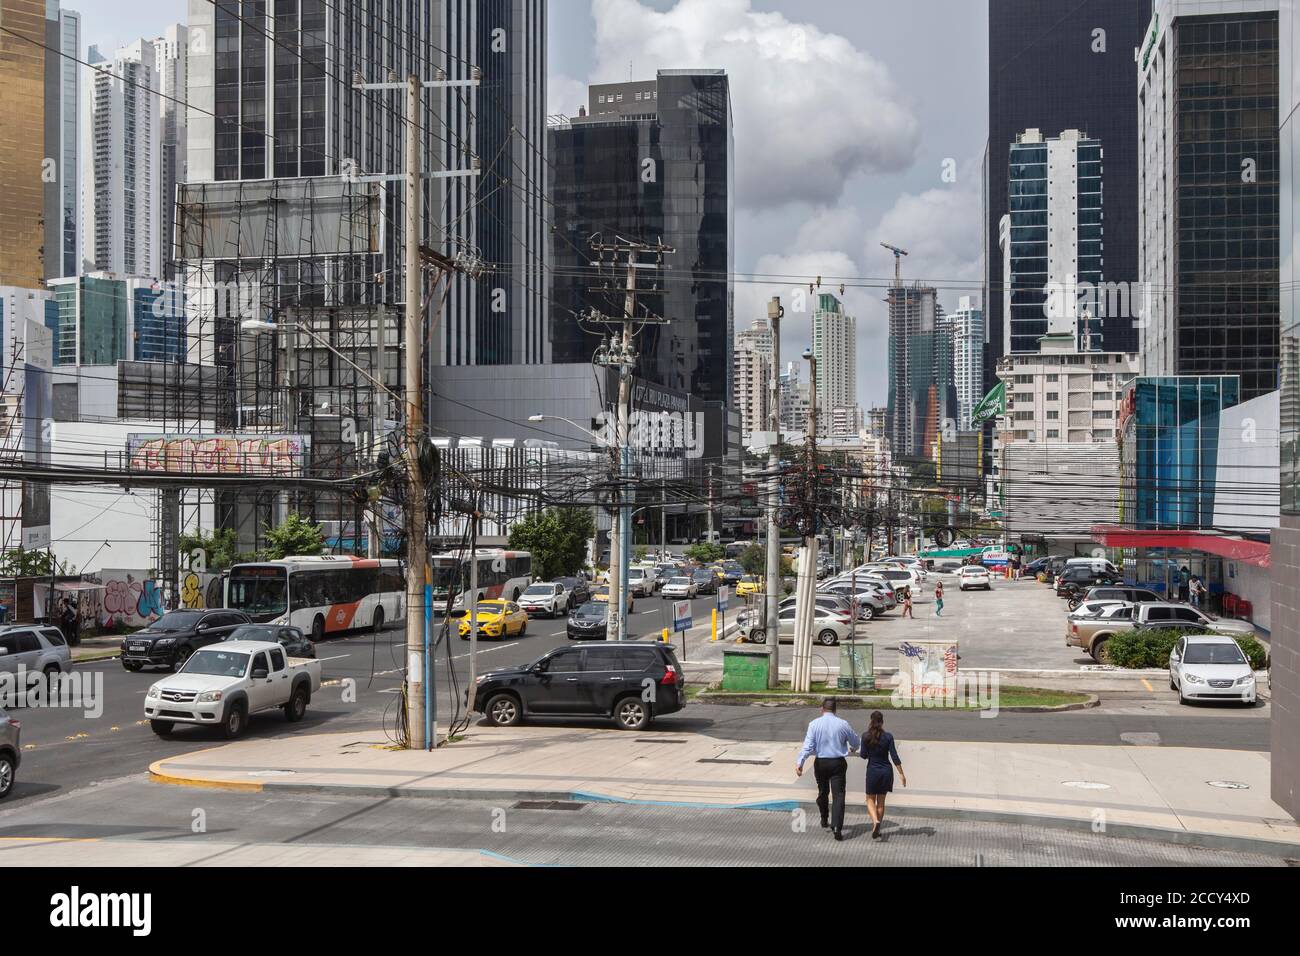 Bank employees crossing the street in the financial district, Panama City, Panama Stock Photo